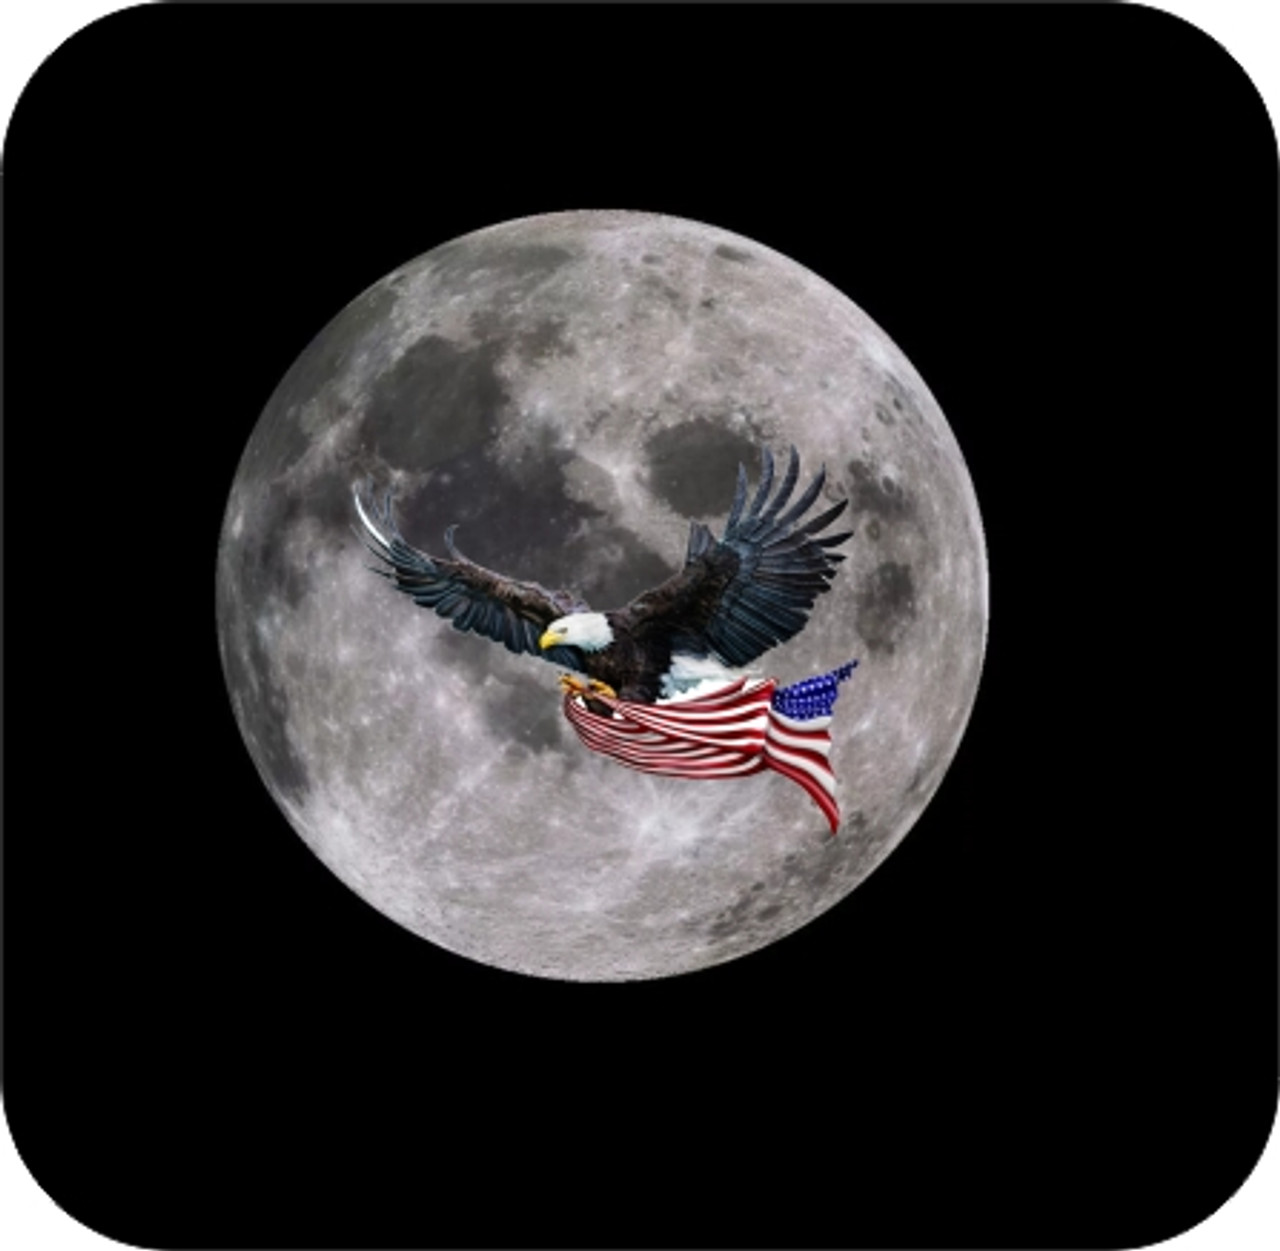 Set of 4 Coaters bald eagle aginst the moon with flag.jpg